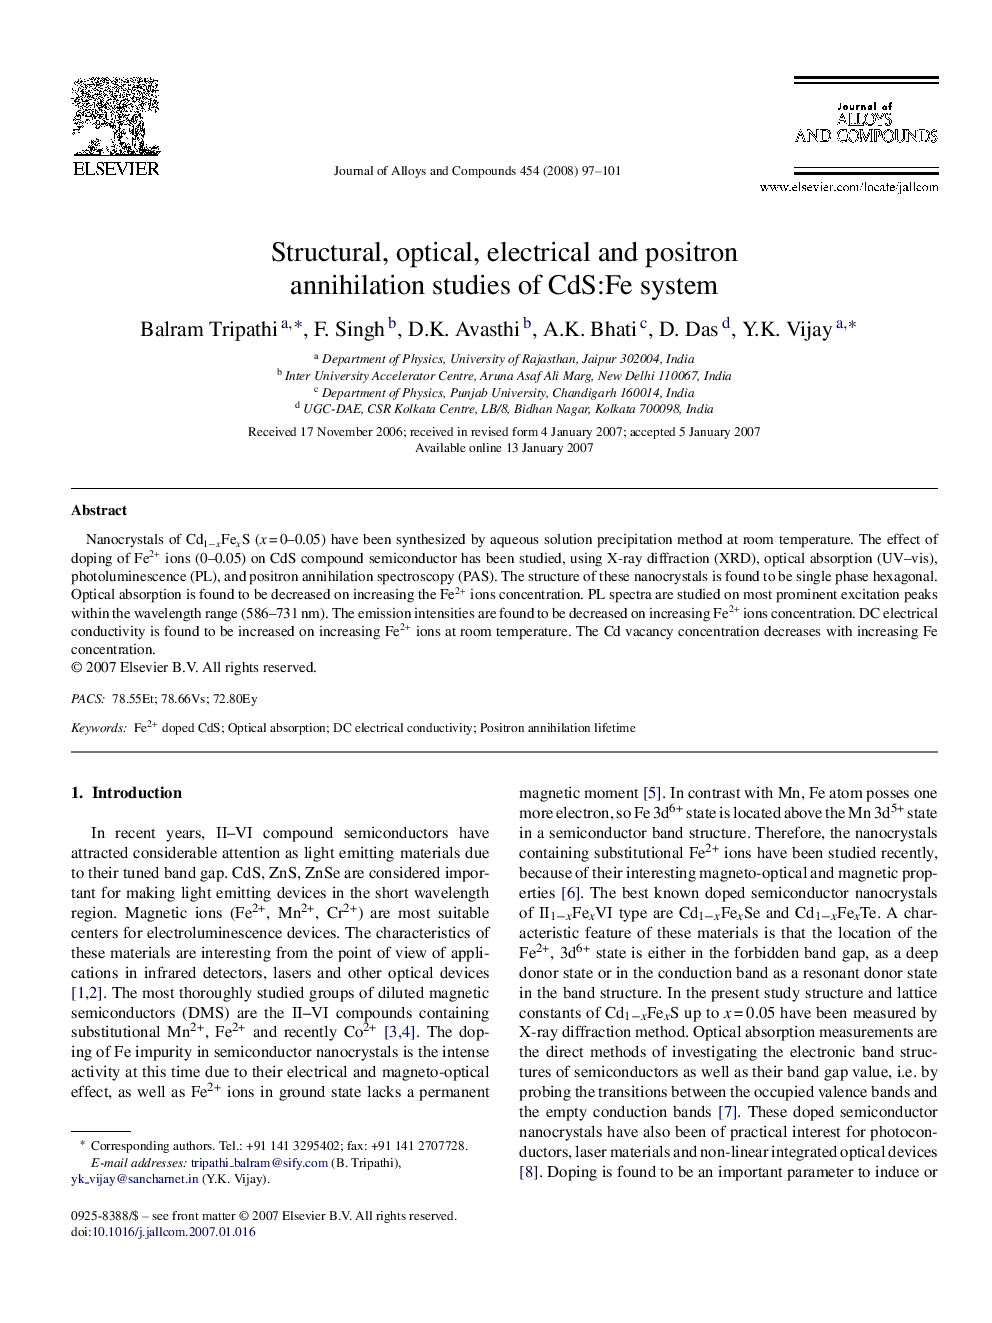 Structural, optical, electrical and positron annihilation studies of CdS:Fe system